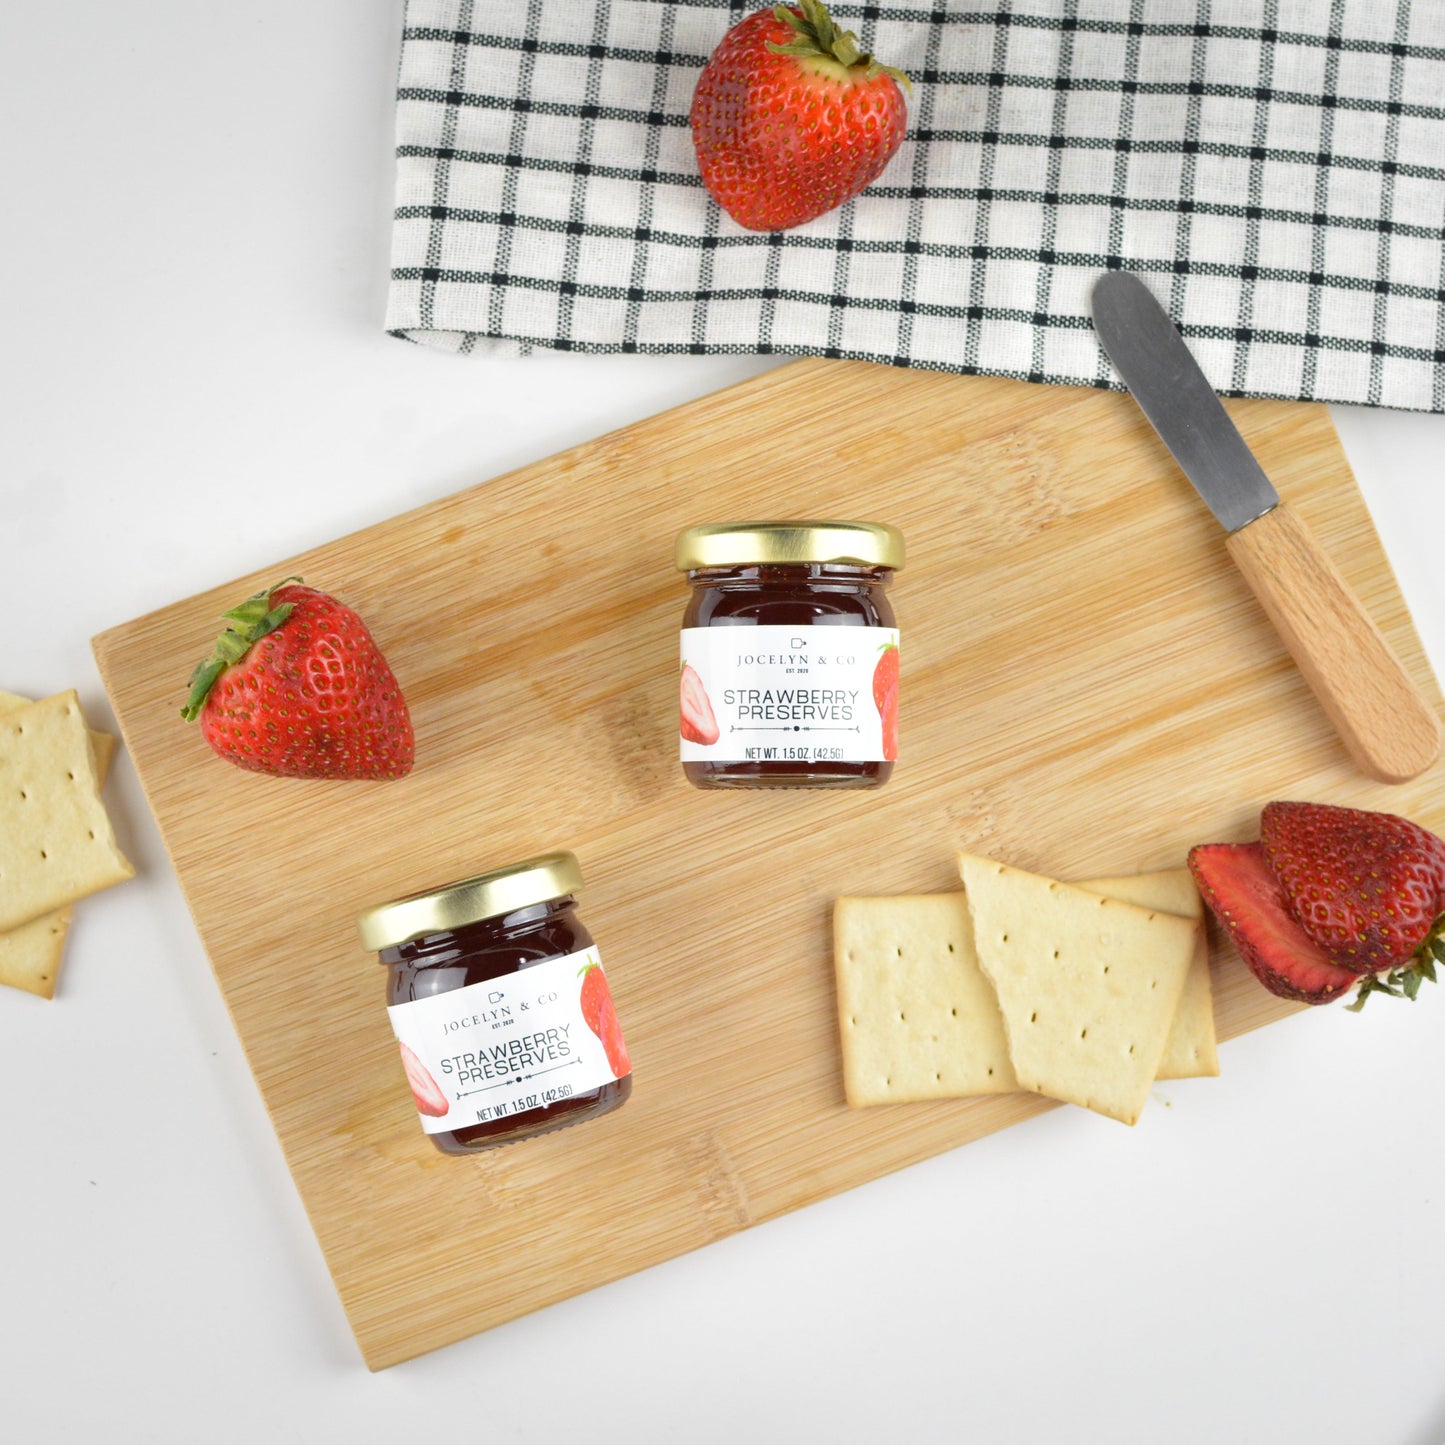 Private Label Packaging Only for Strawberry Preserves-250